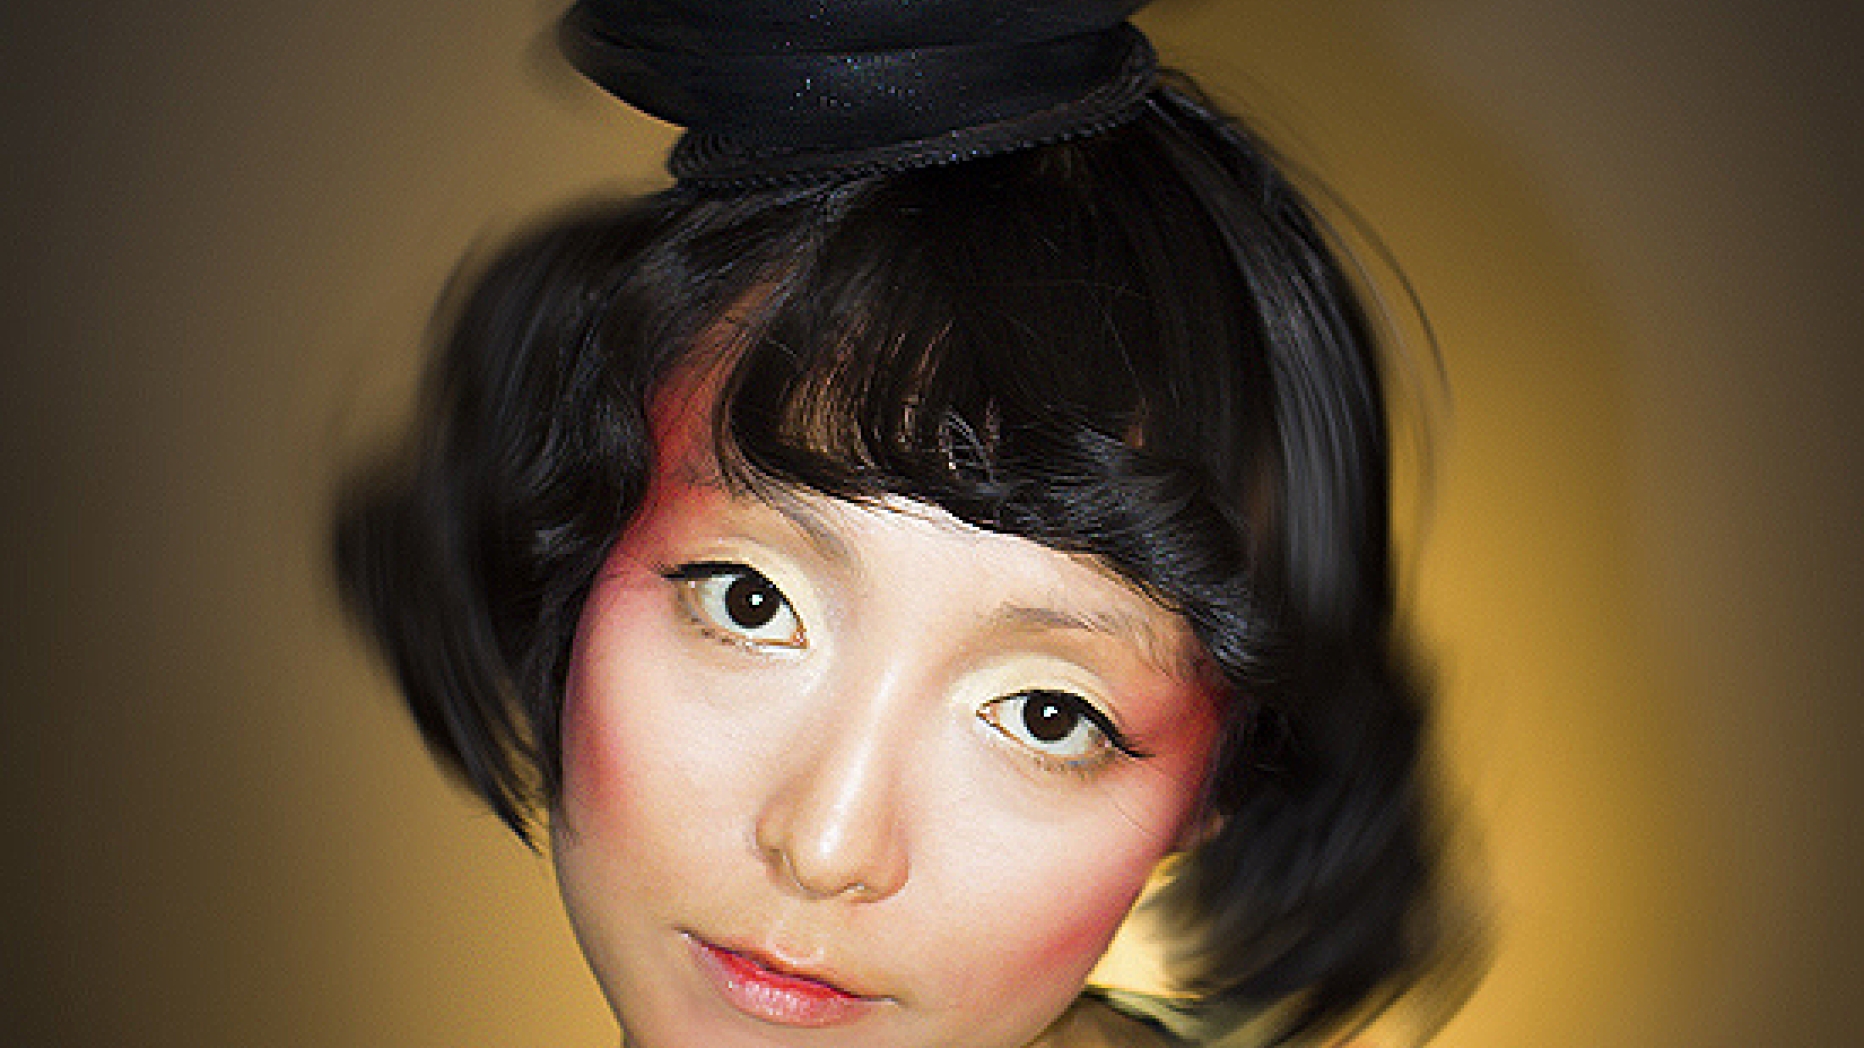 Photograph of woman wearing colorful makeup and clothing. Everything outside of her face has been blurred but the colors are still visible.